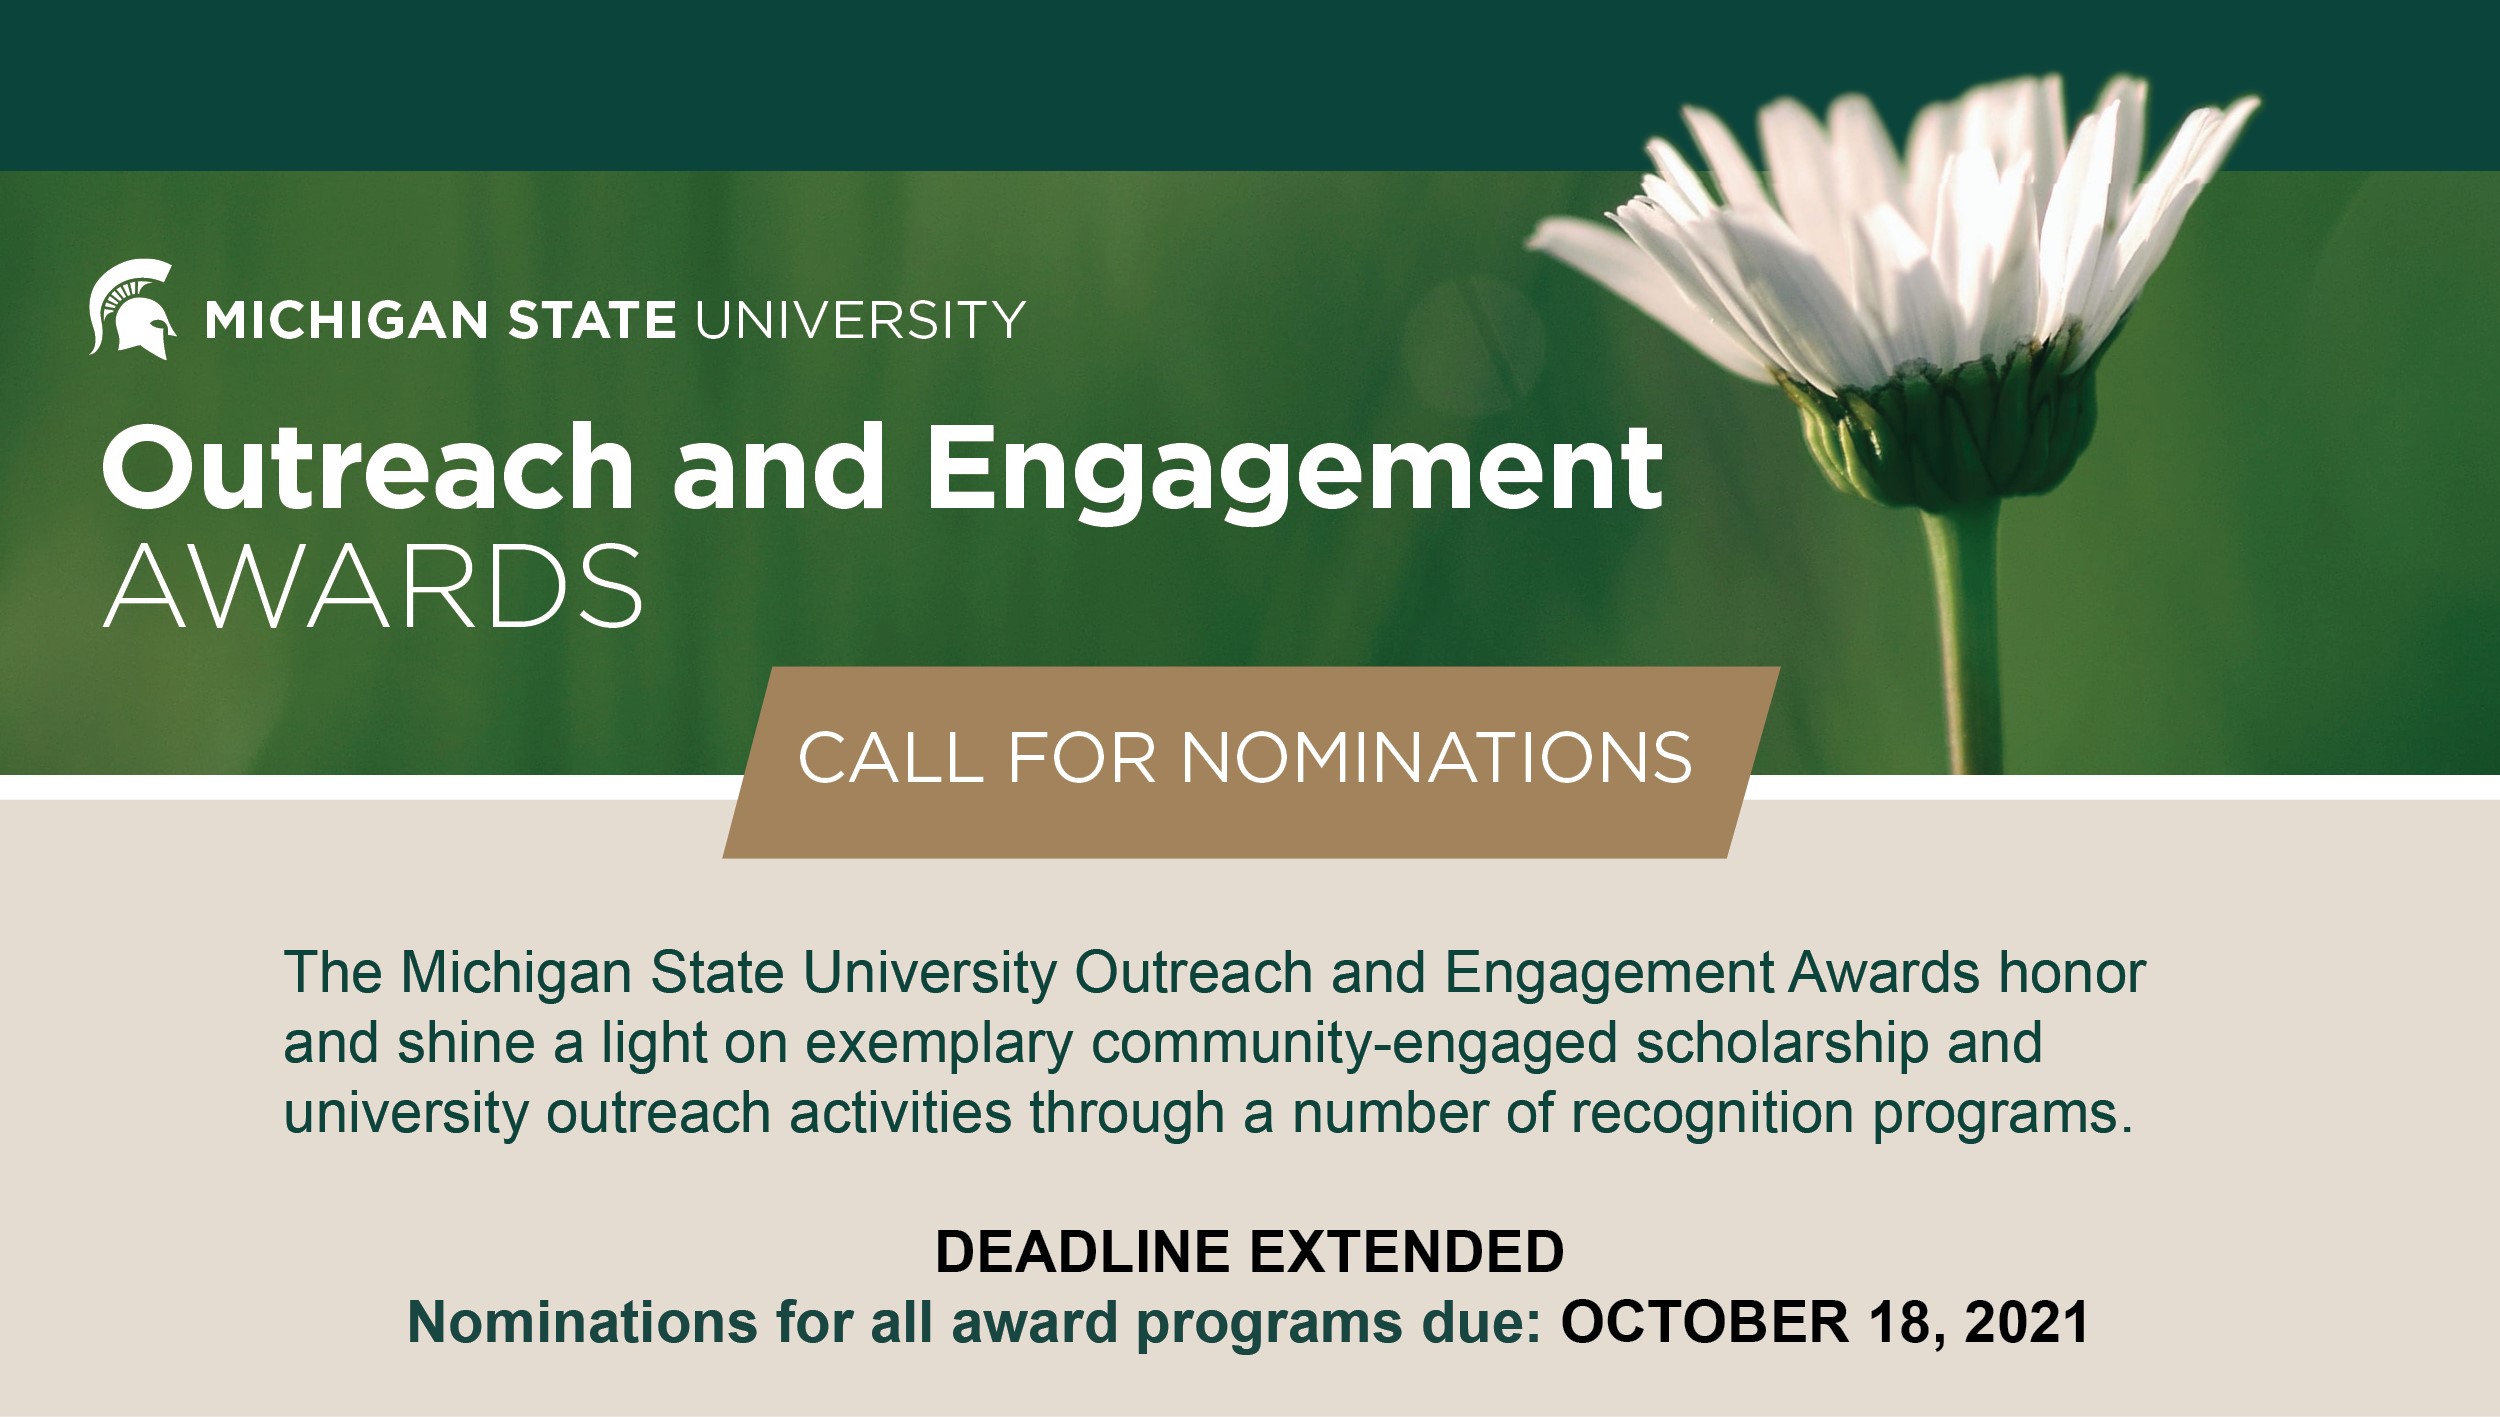 Michigan State University Outreach and Engagement Awards Call for Nominations - The Michigan State University Outreach and Engagement Awards honor and shine a light on exemplary community-engaged scholarship and university outreach activities through a number of recognition programs. Nomination for all award programs due: October 7, 2021